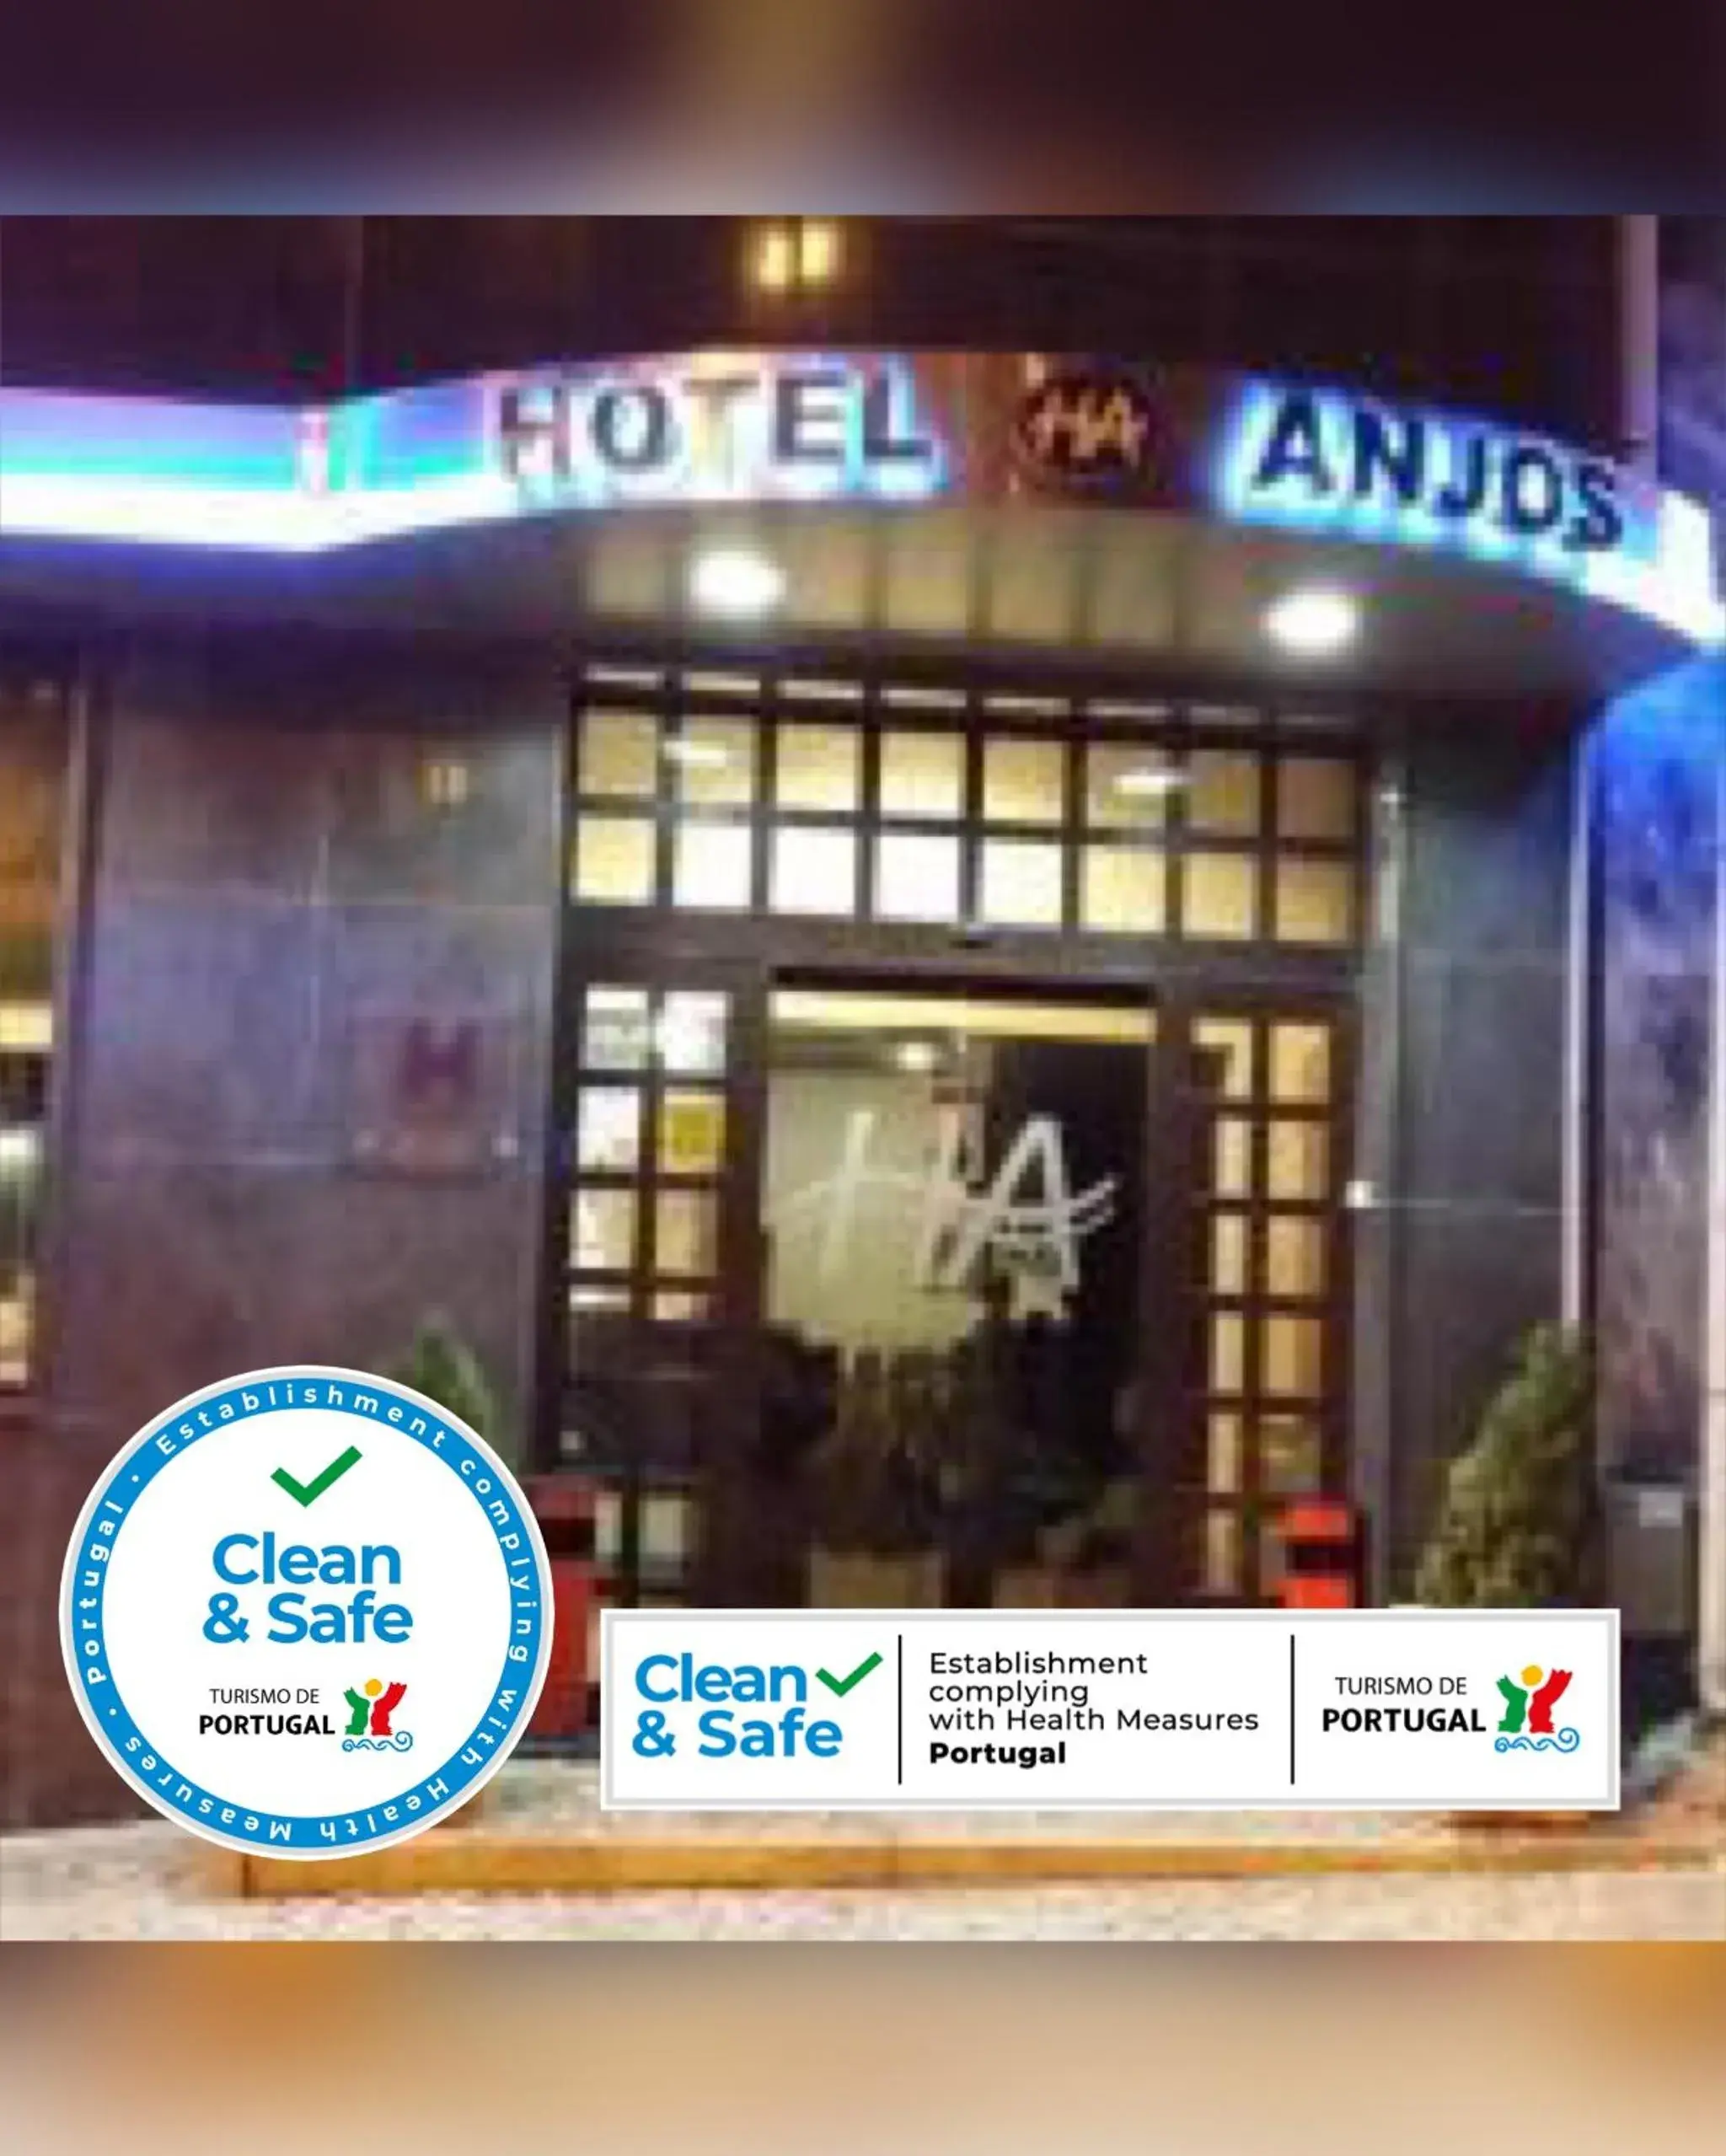 Logo/Certificate/Sign, Property Logo/Sign in Hotel Anjos